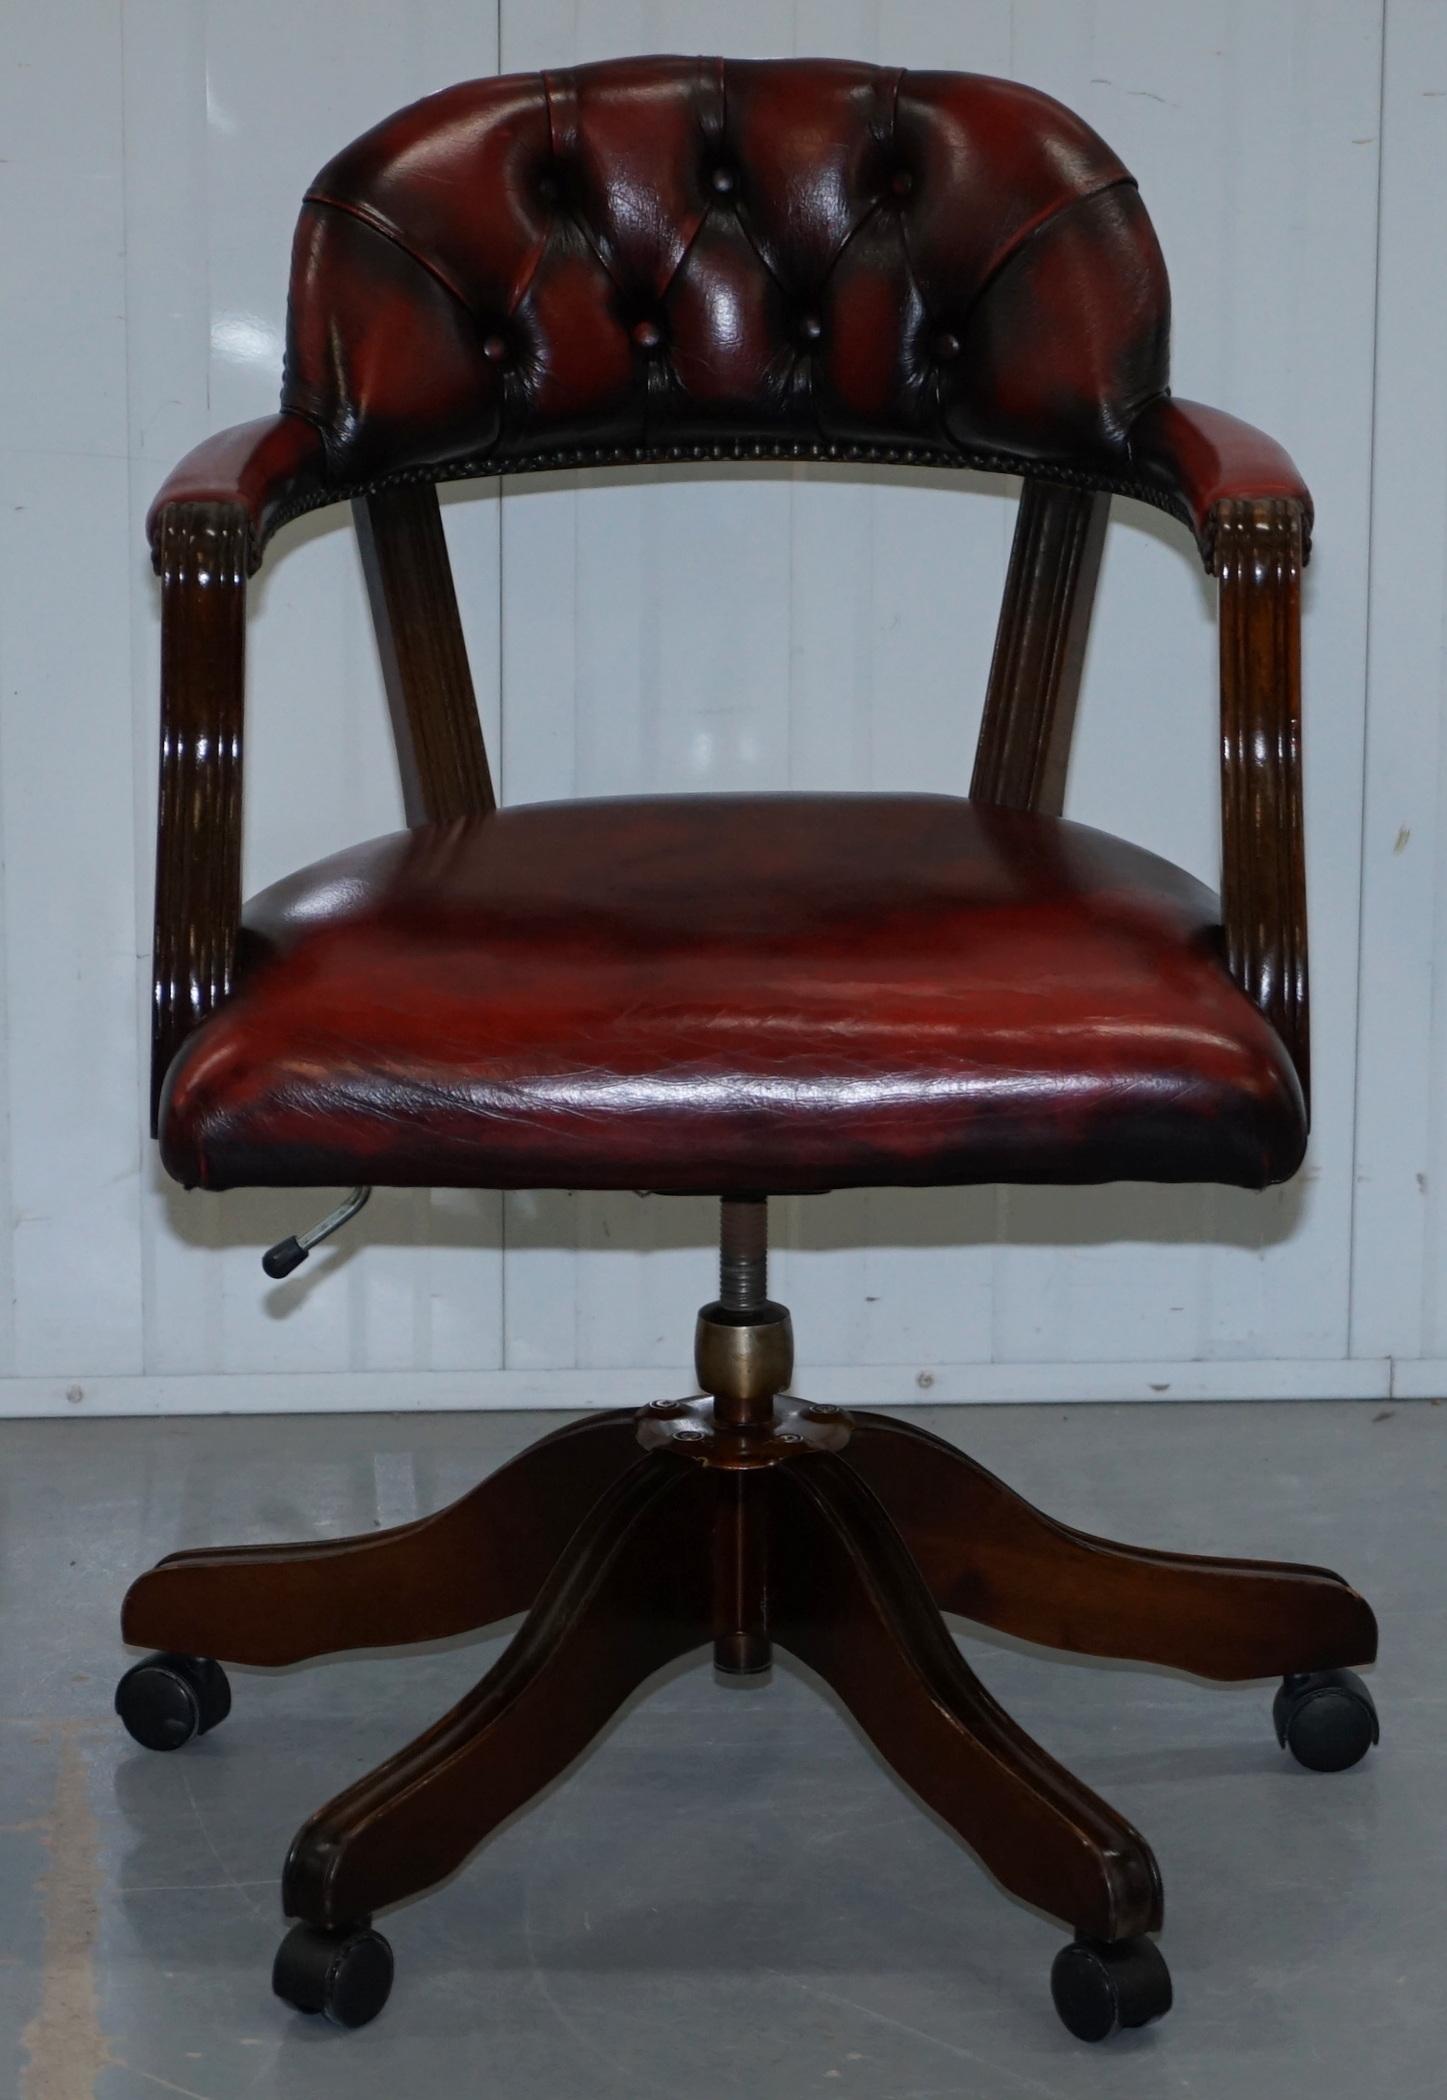 We are delighted to offer for sale this lovely vintage oxblood leather Chesterfield Admirals court captain’s chair

These chairs are called court chairs because they little the British court system during the 1960s-1980s.

This chair is in